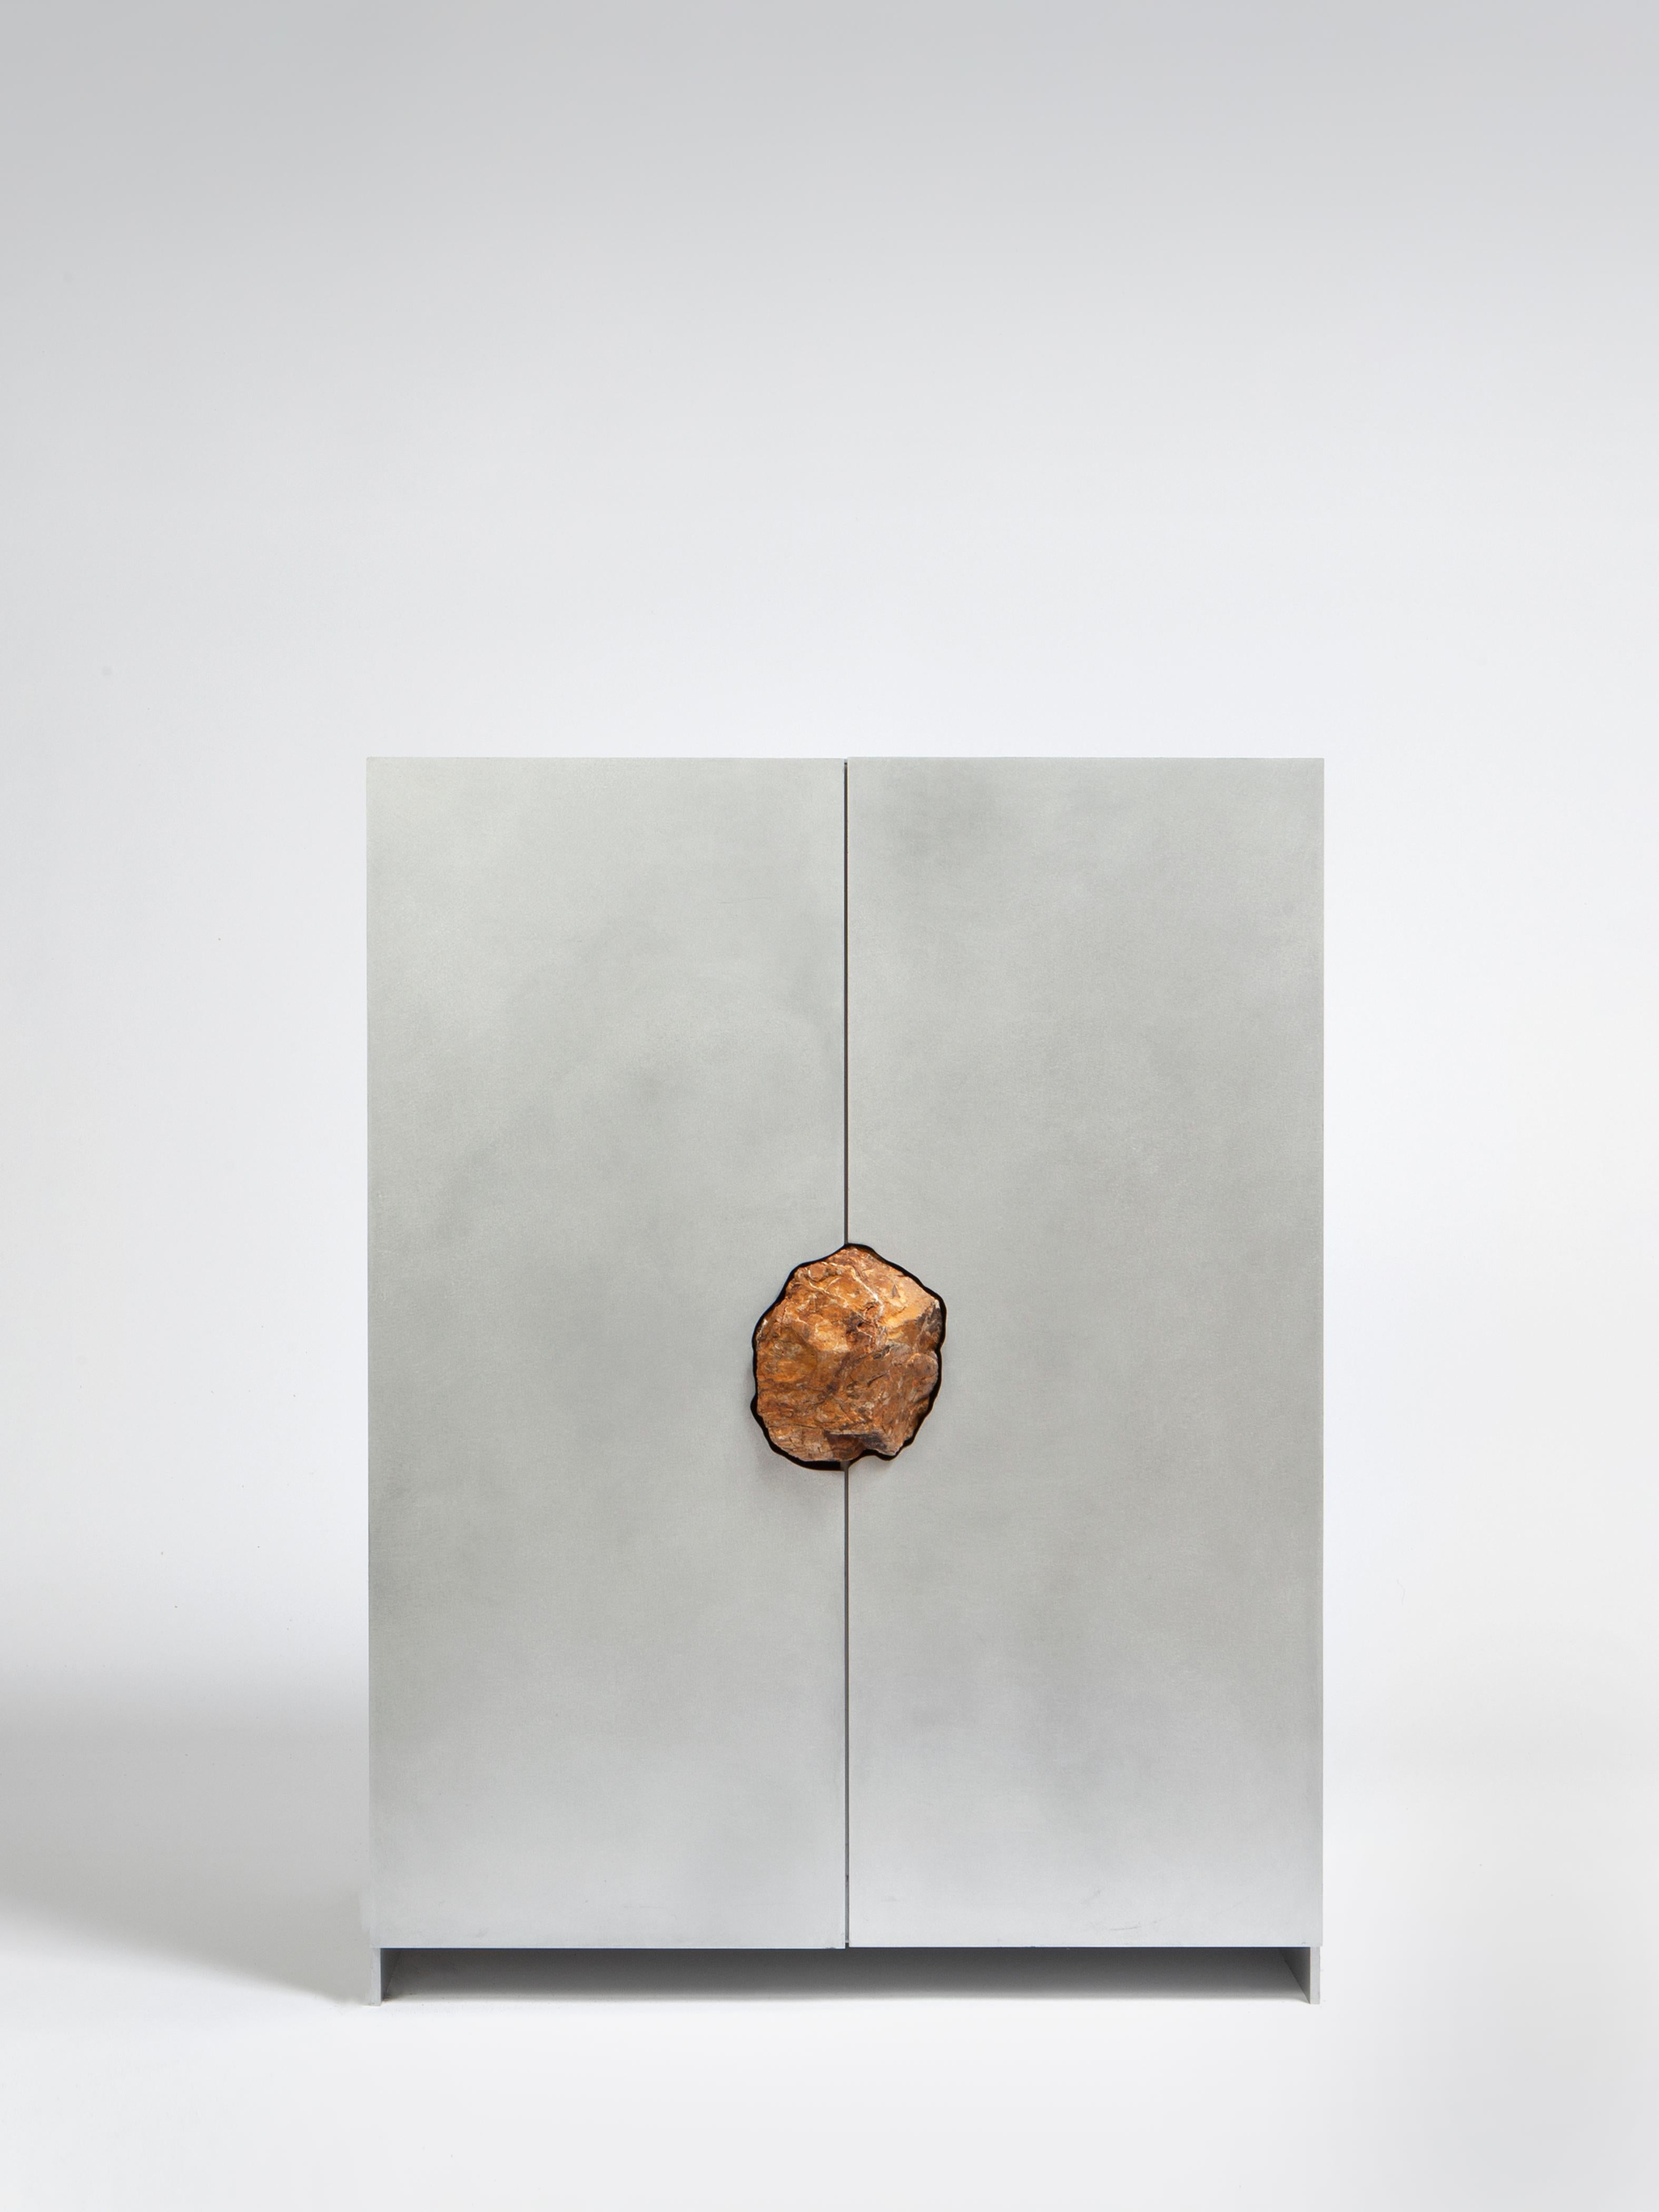 Small cabinet with petrified oak by Pierre De Valck.
Dimensions: W 55 x D 34 x H 70 cm.
Materials: Waxed aluminium with petrified oak
Weight: 35 kg.
Each piece is unique.

Pierre De Valck (1991) born in Brussels, is a Ghent-based designer with